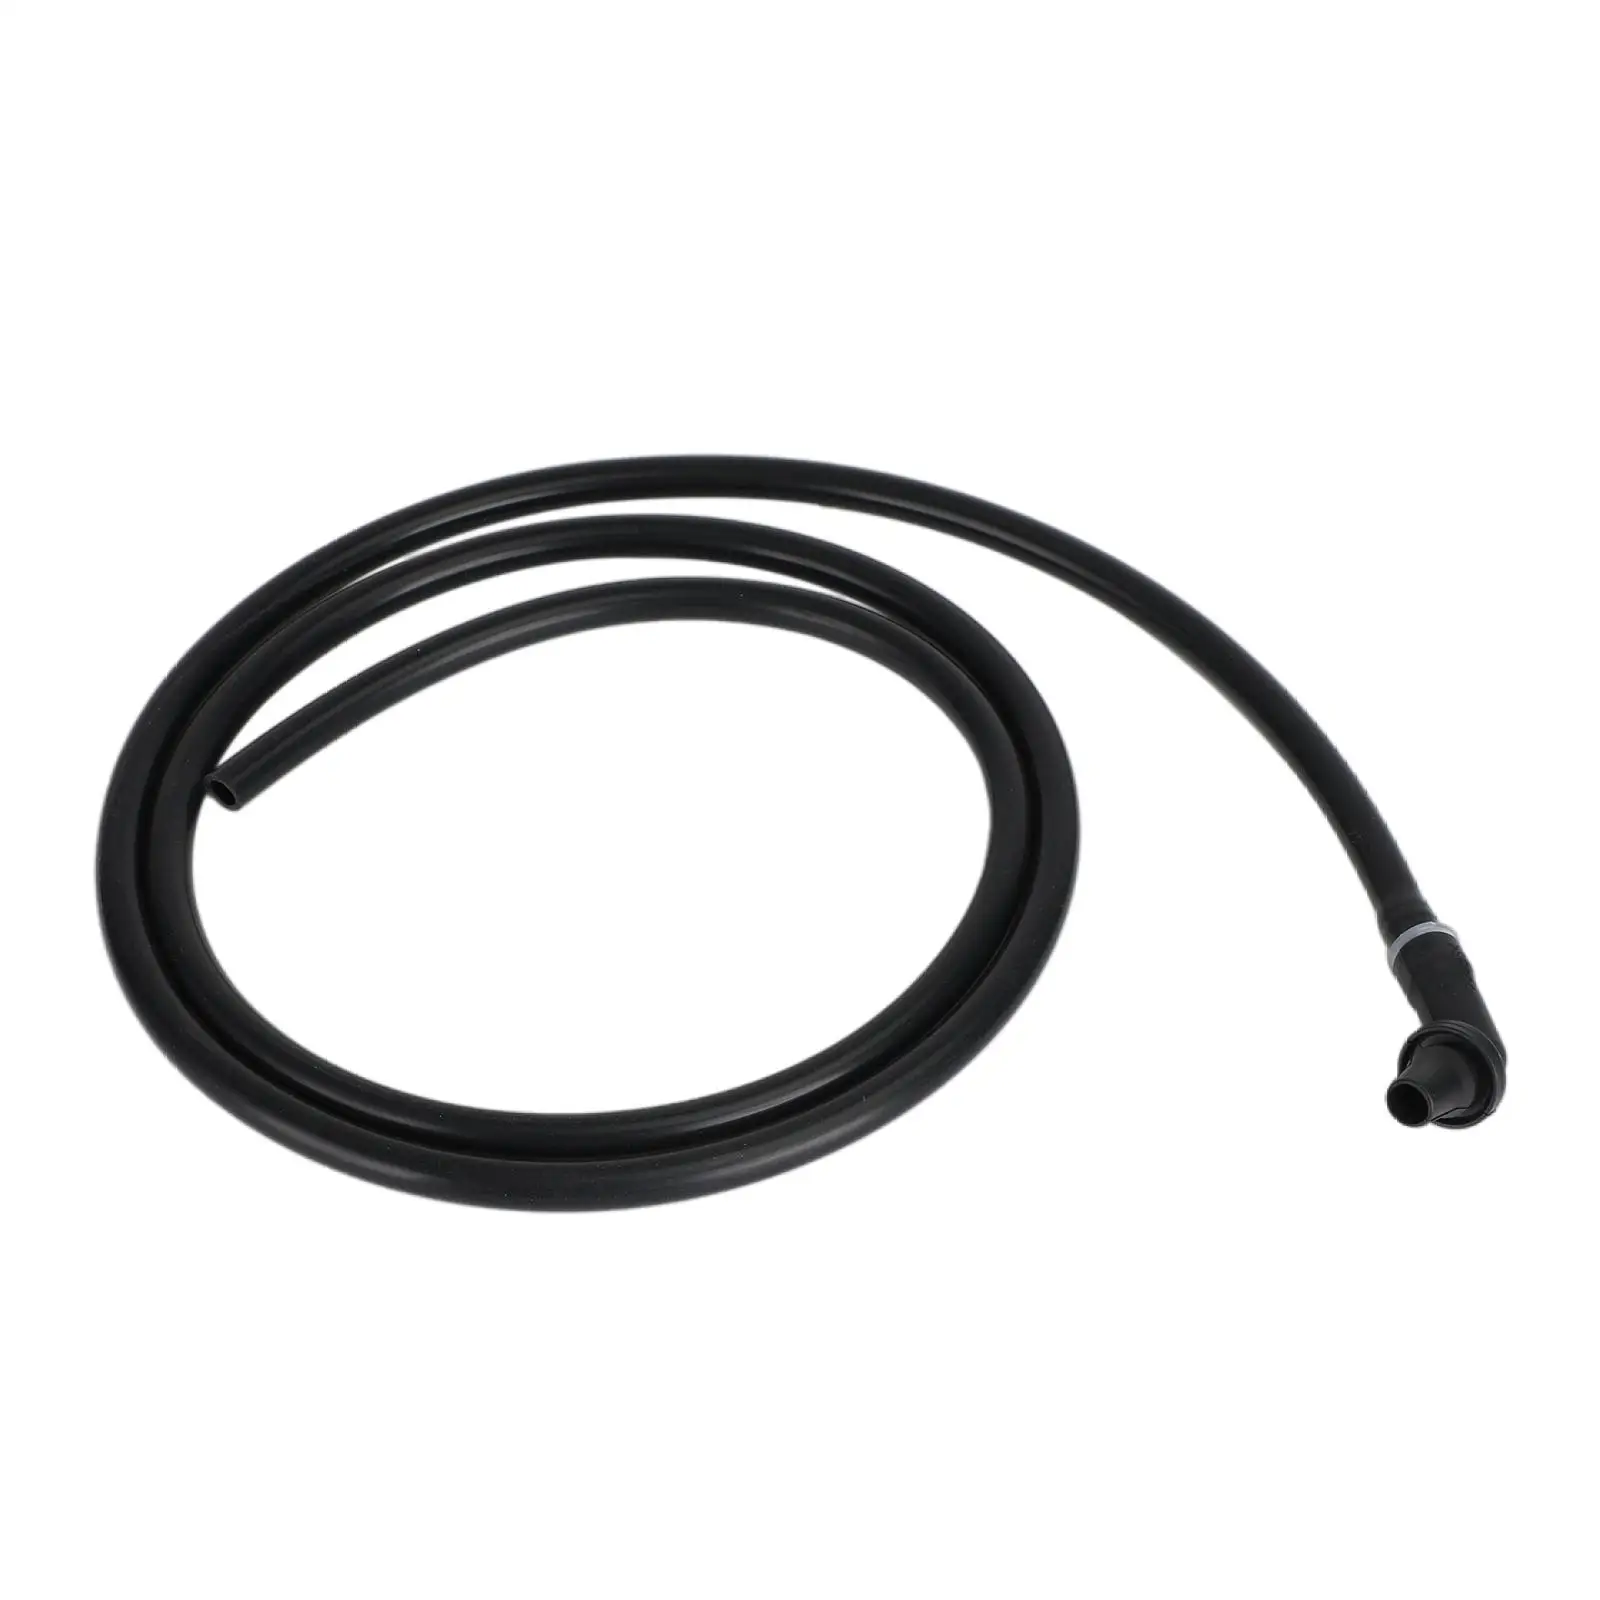 Sunroof Front Drain Hose Water Tube Eeh500100 Fit for Landrover Discovery 3 Replaces